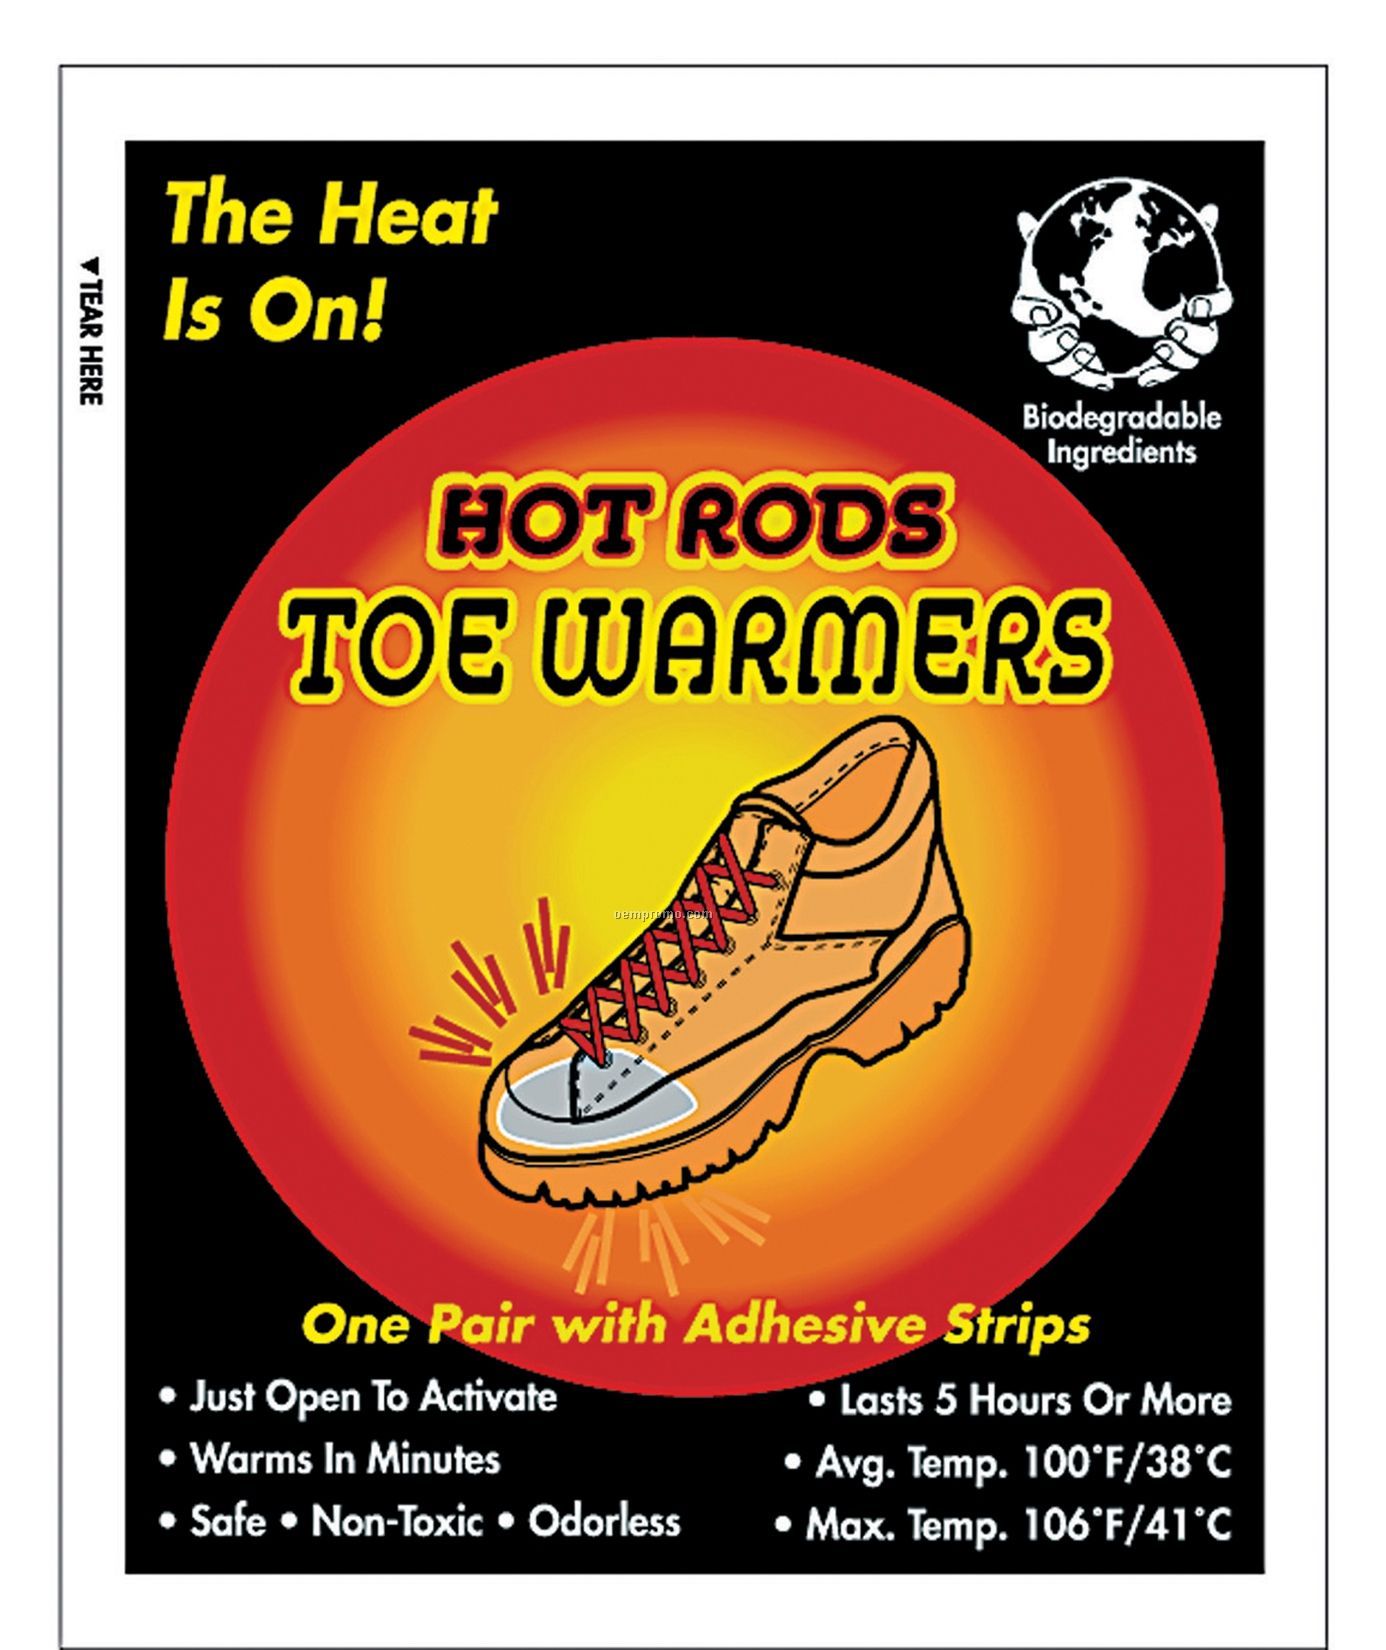 Hot Rods Warming Packs - Toe Warmers